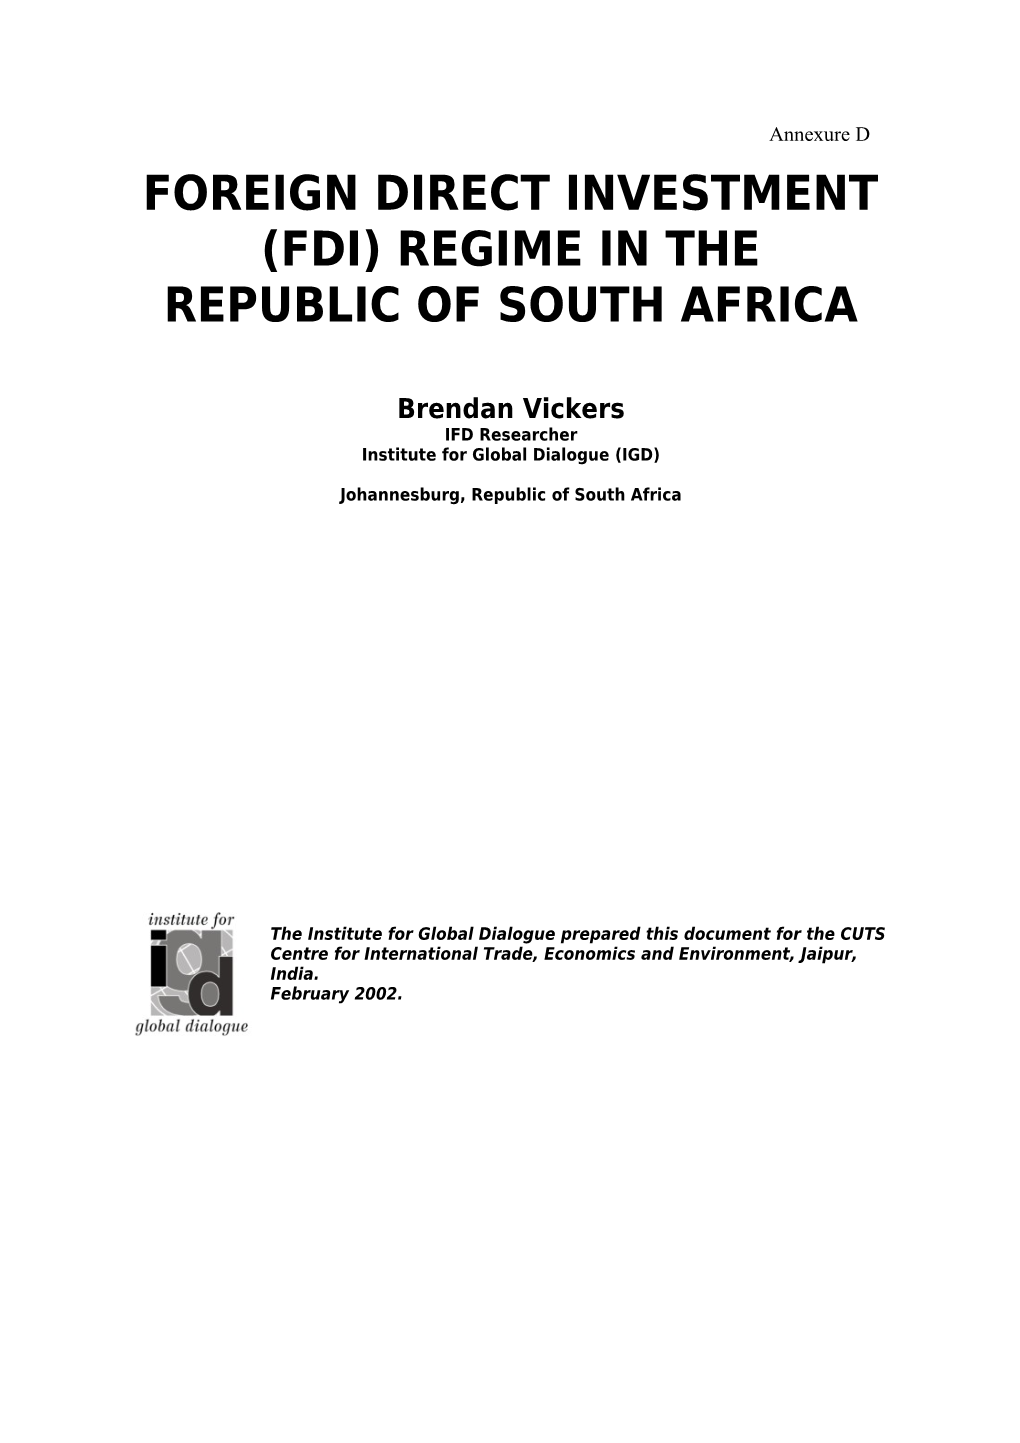 Foreign Direct Investment (Fdi) Regime in The